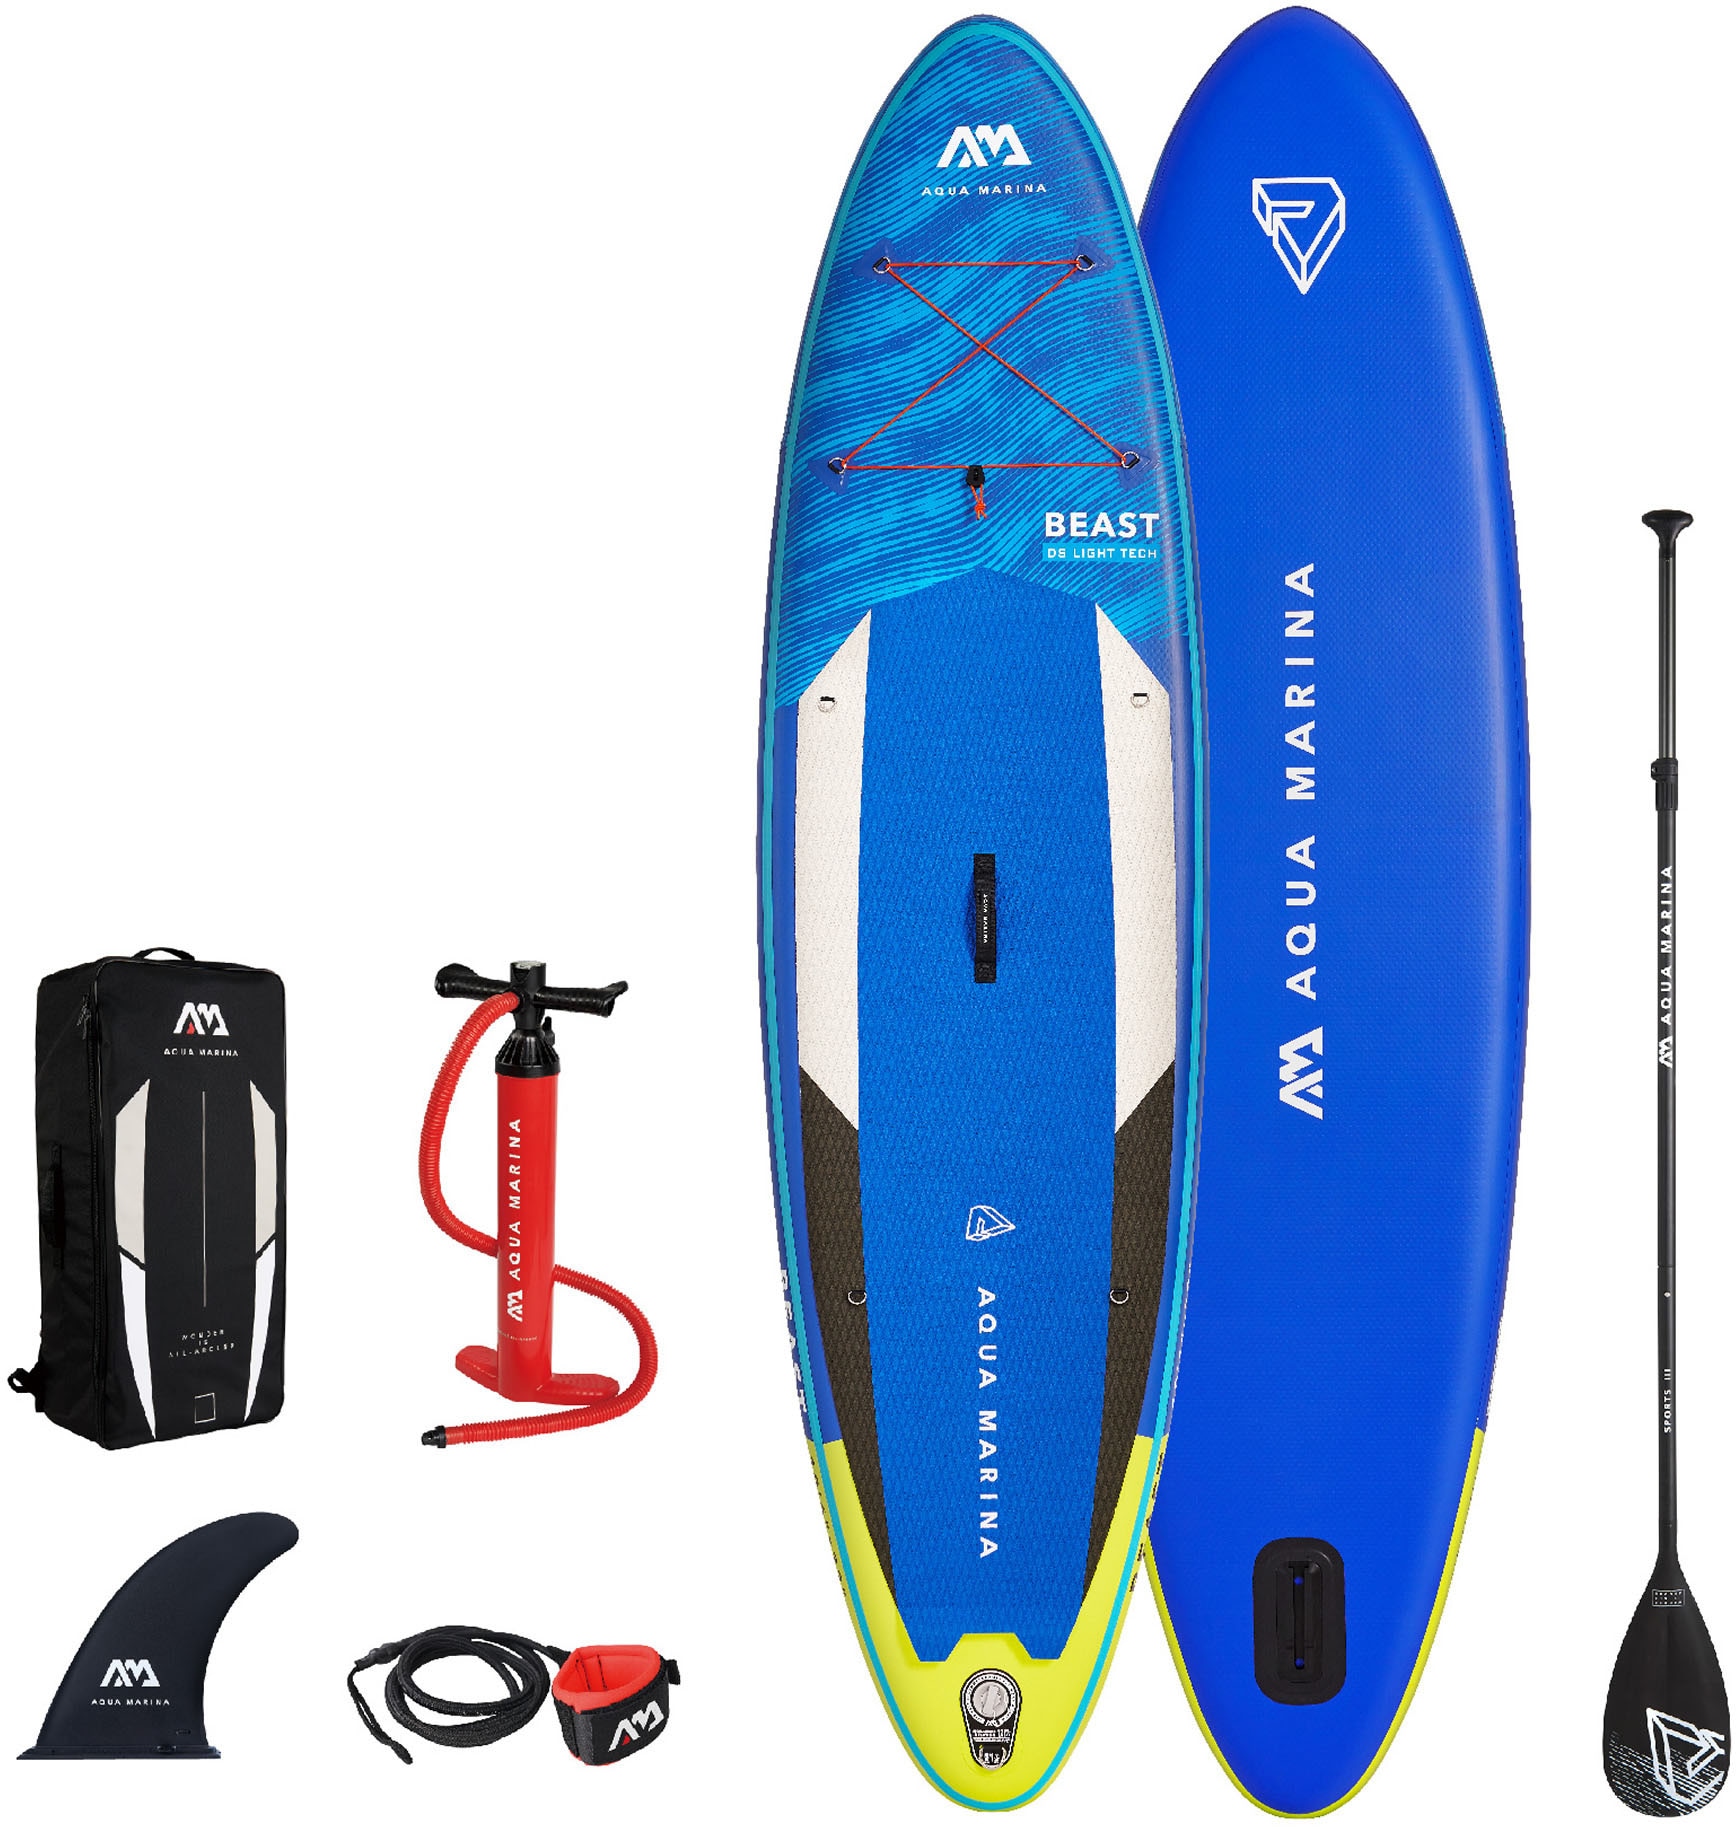 SUP-Boards online bei kaufen jetzt Stand-Up Paddle 